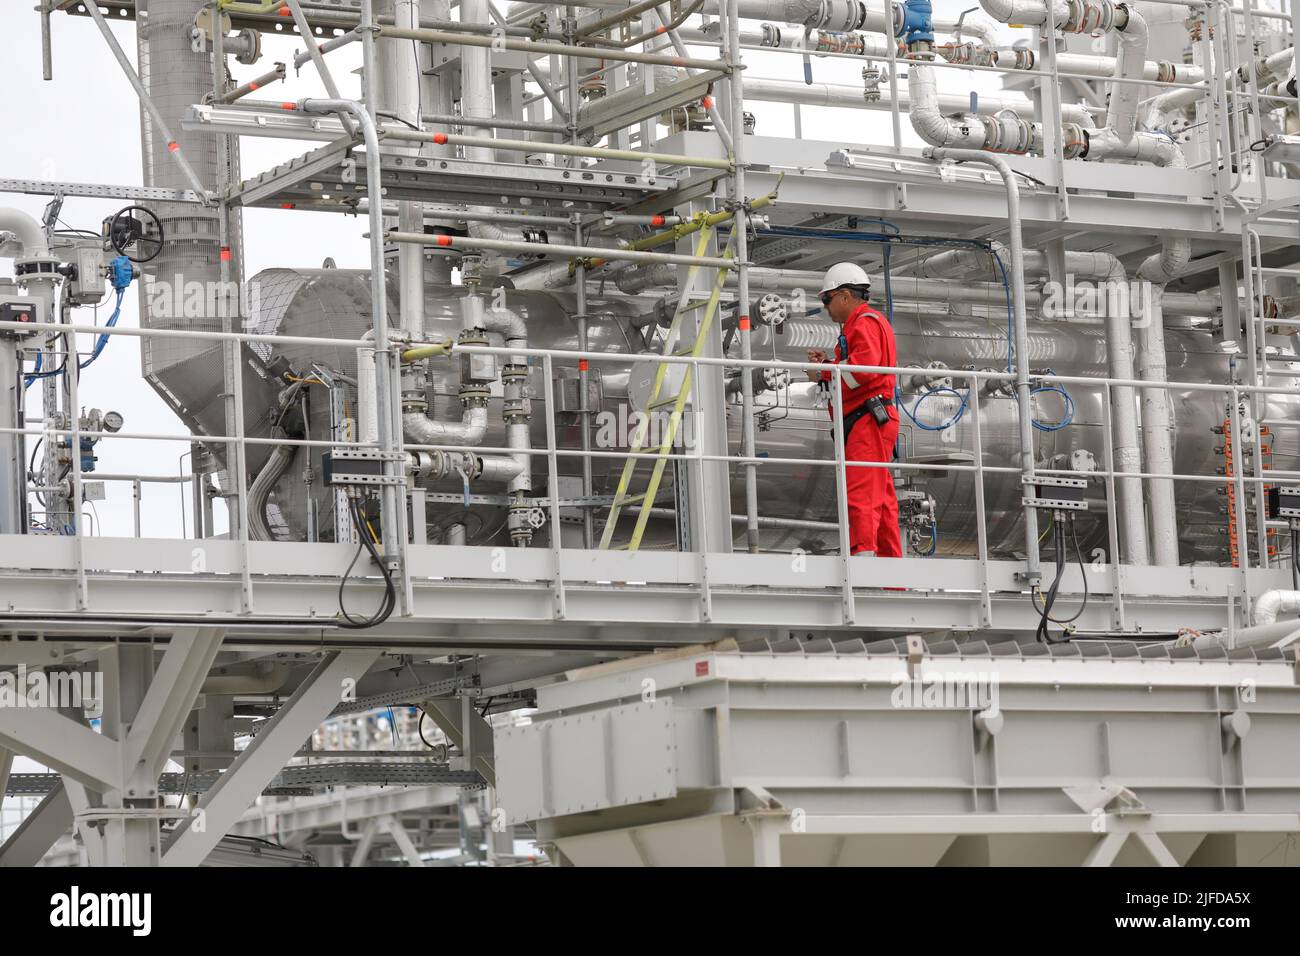 Vadu, Romania - June 28, 2022: Engineer works at a gas treatment plant. Stock Photo